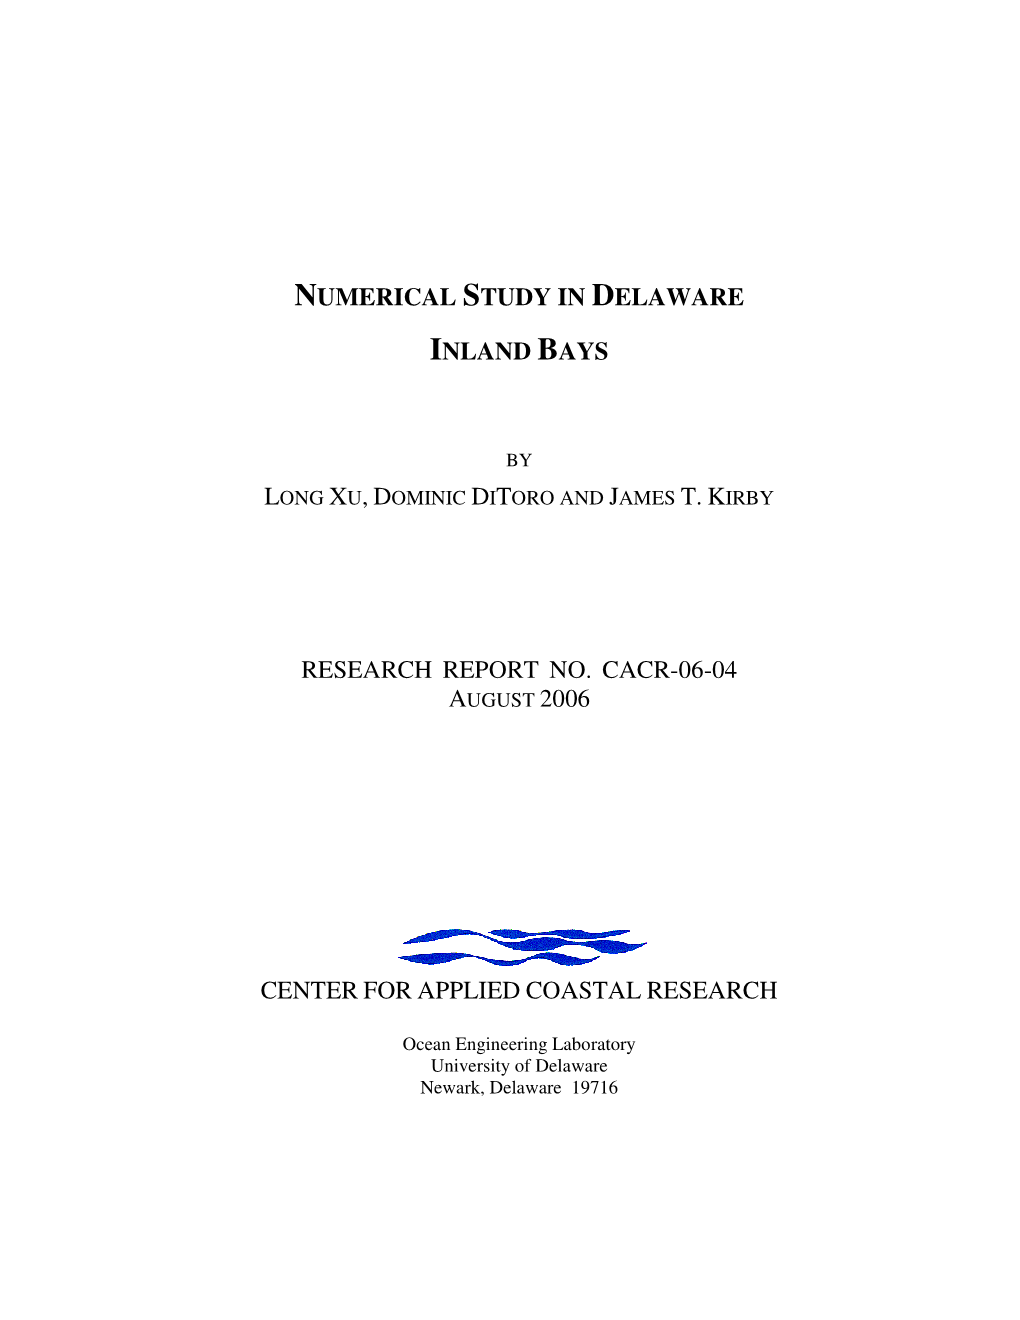 Numerical Study in Delaware Inland Bays